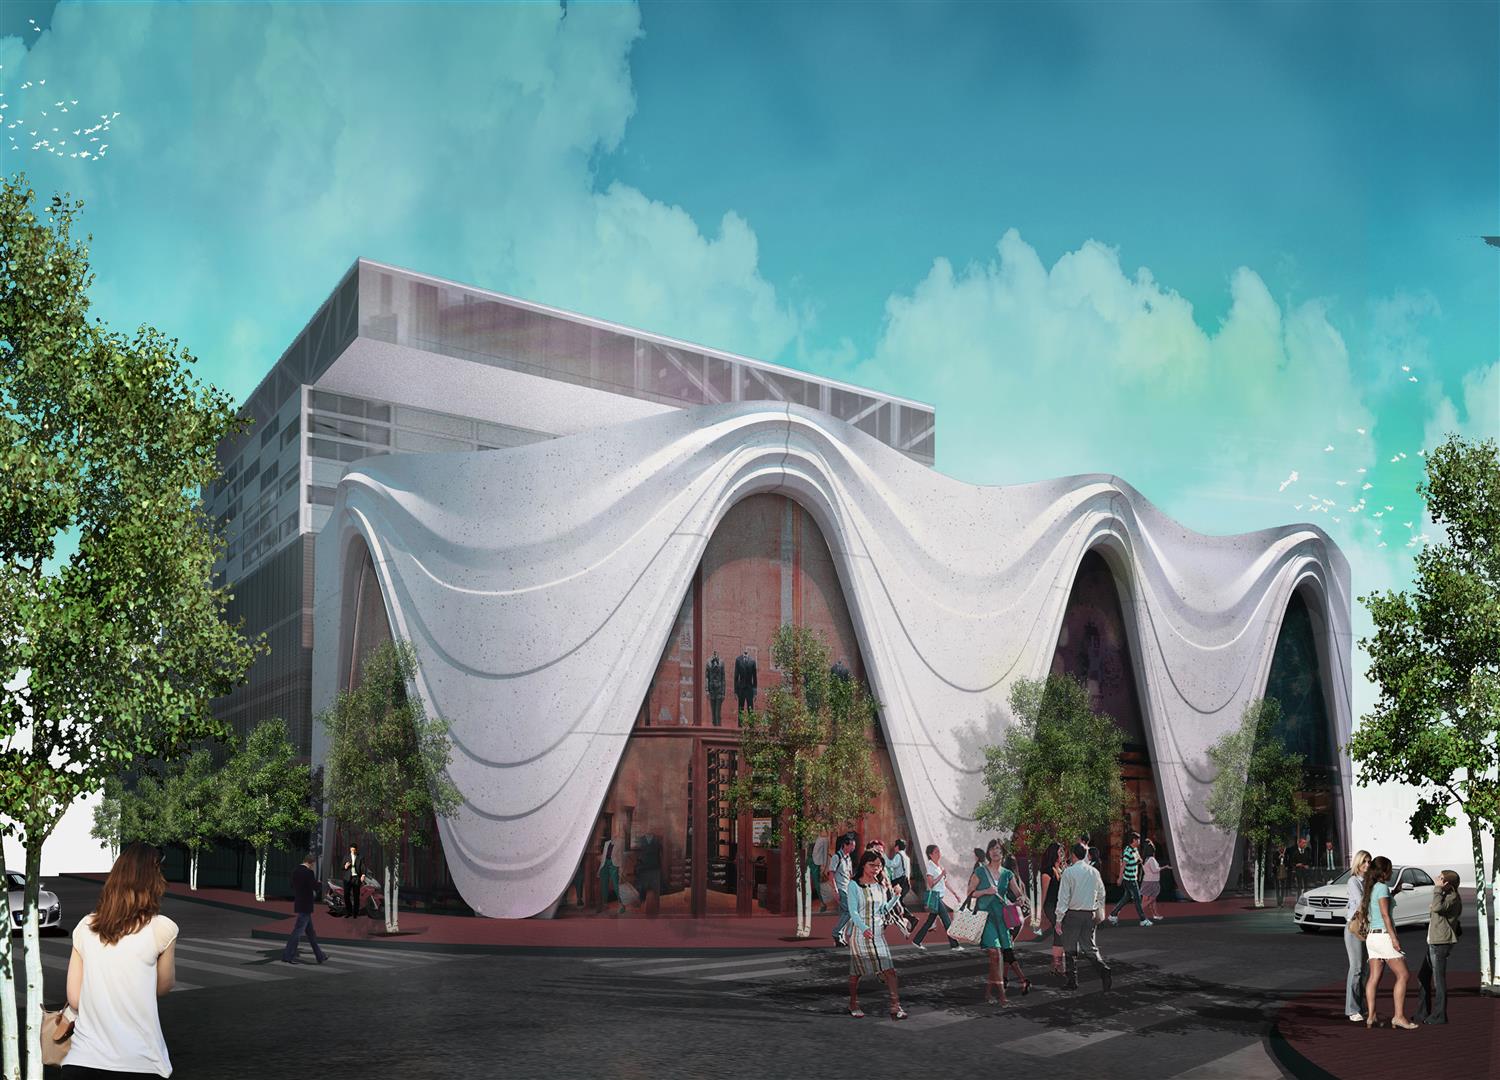 Chad Oppenheim Designing Retail Building With Drippy Facade in the Design District